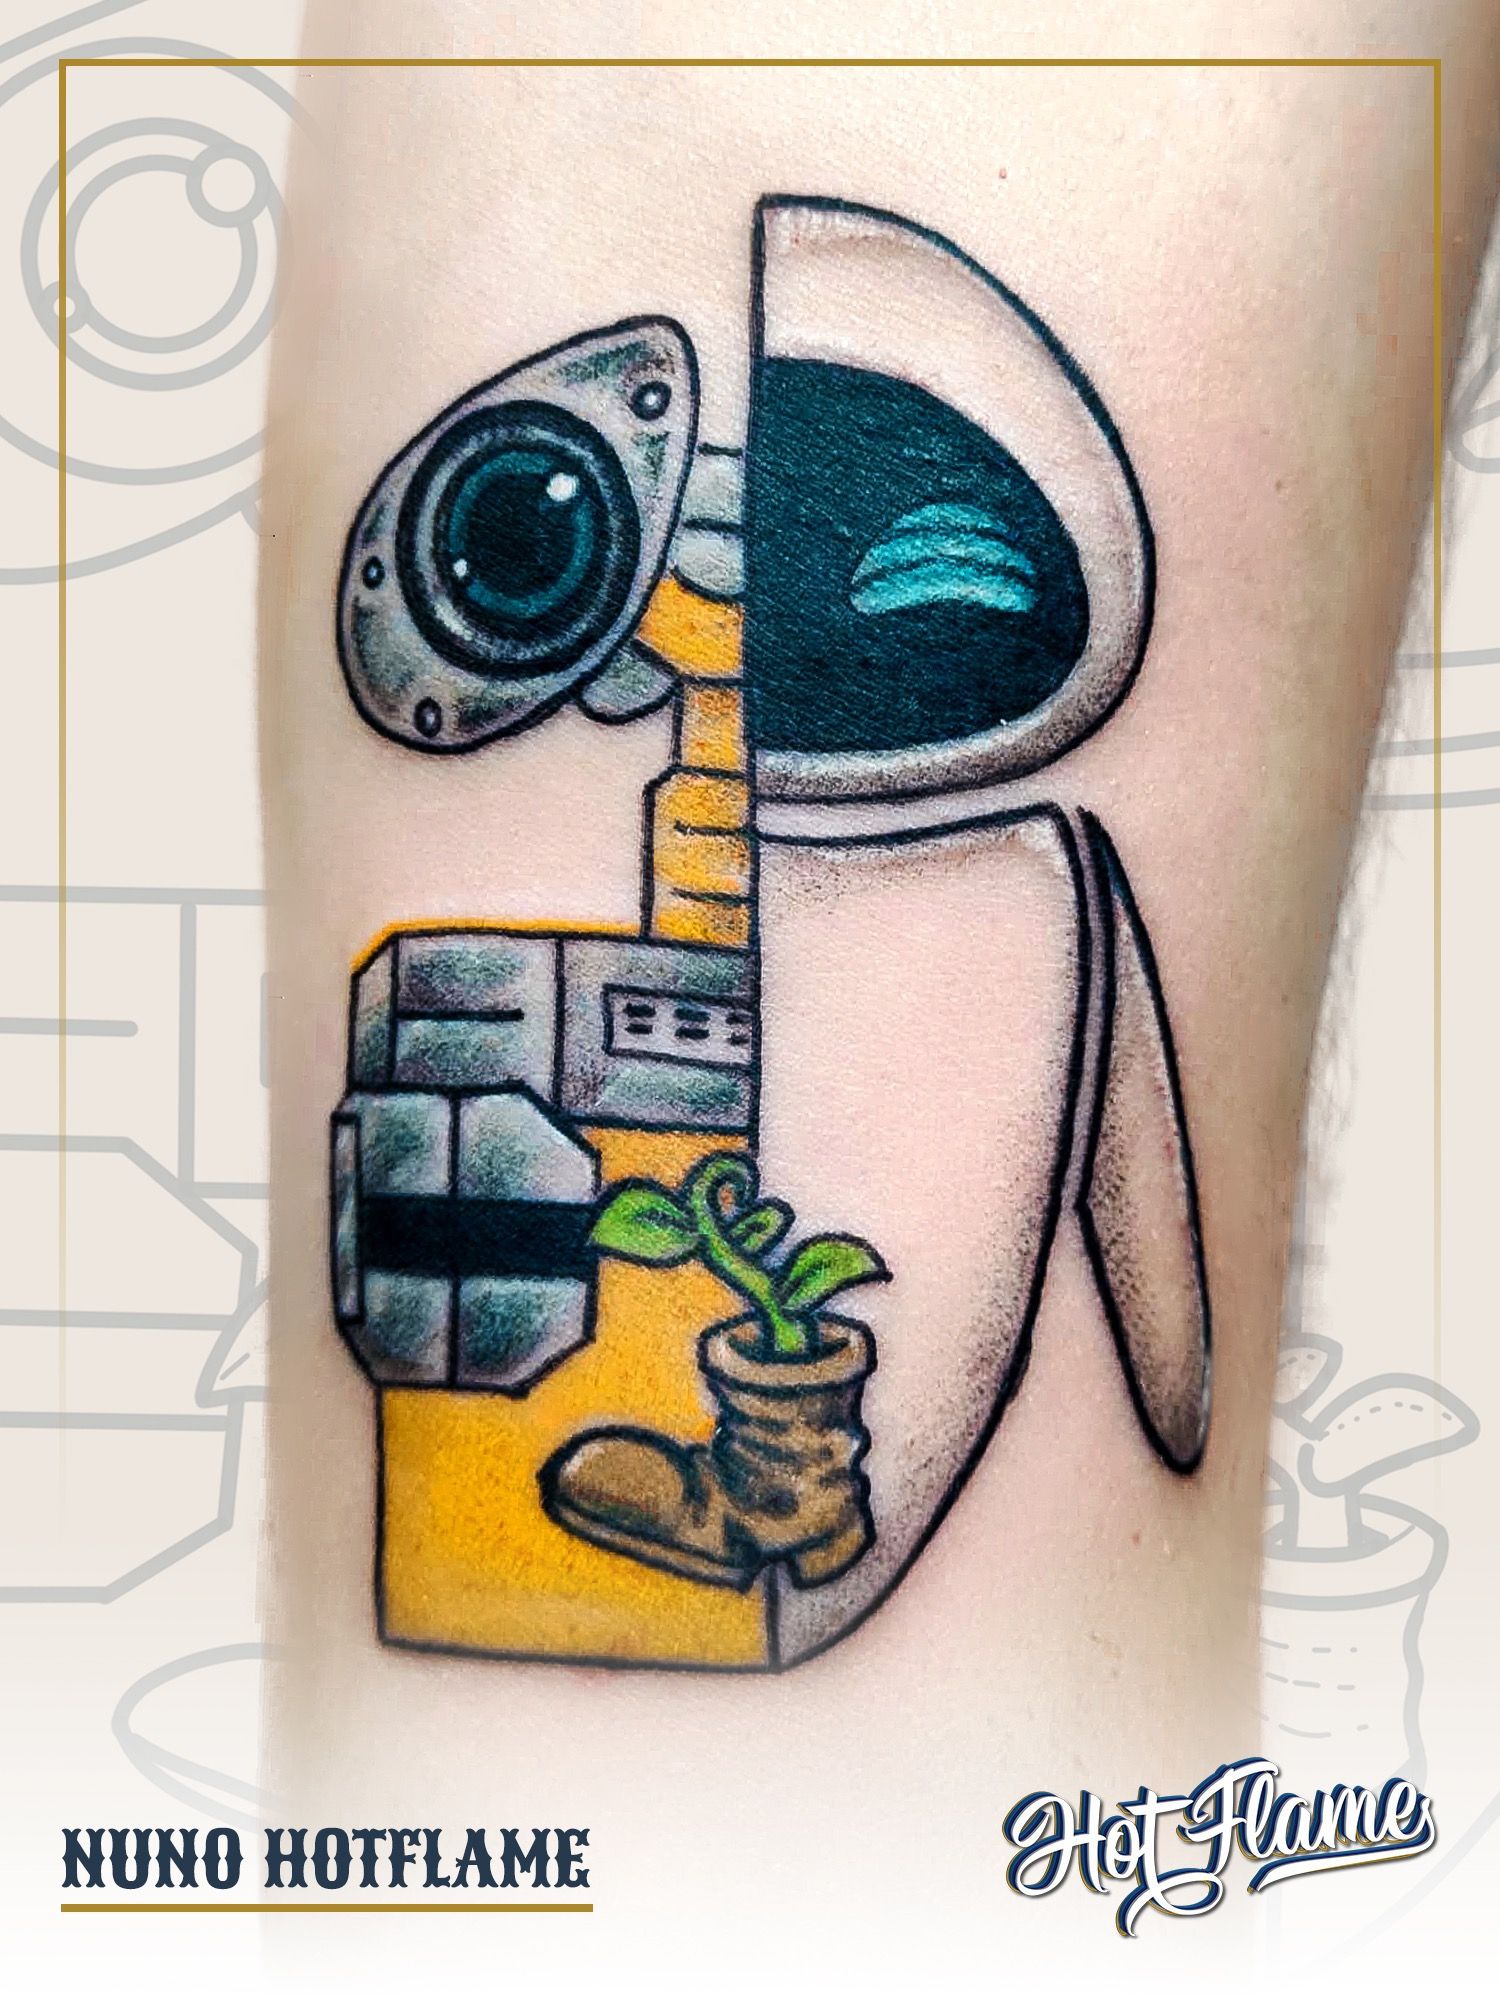 Walle and Eve tattoo on the right calf